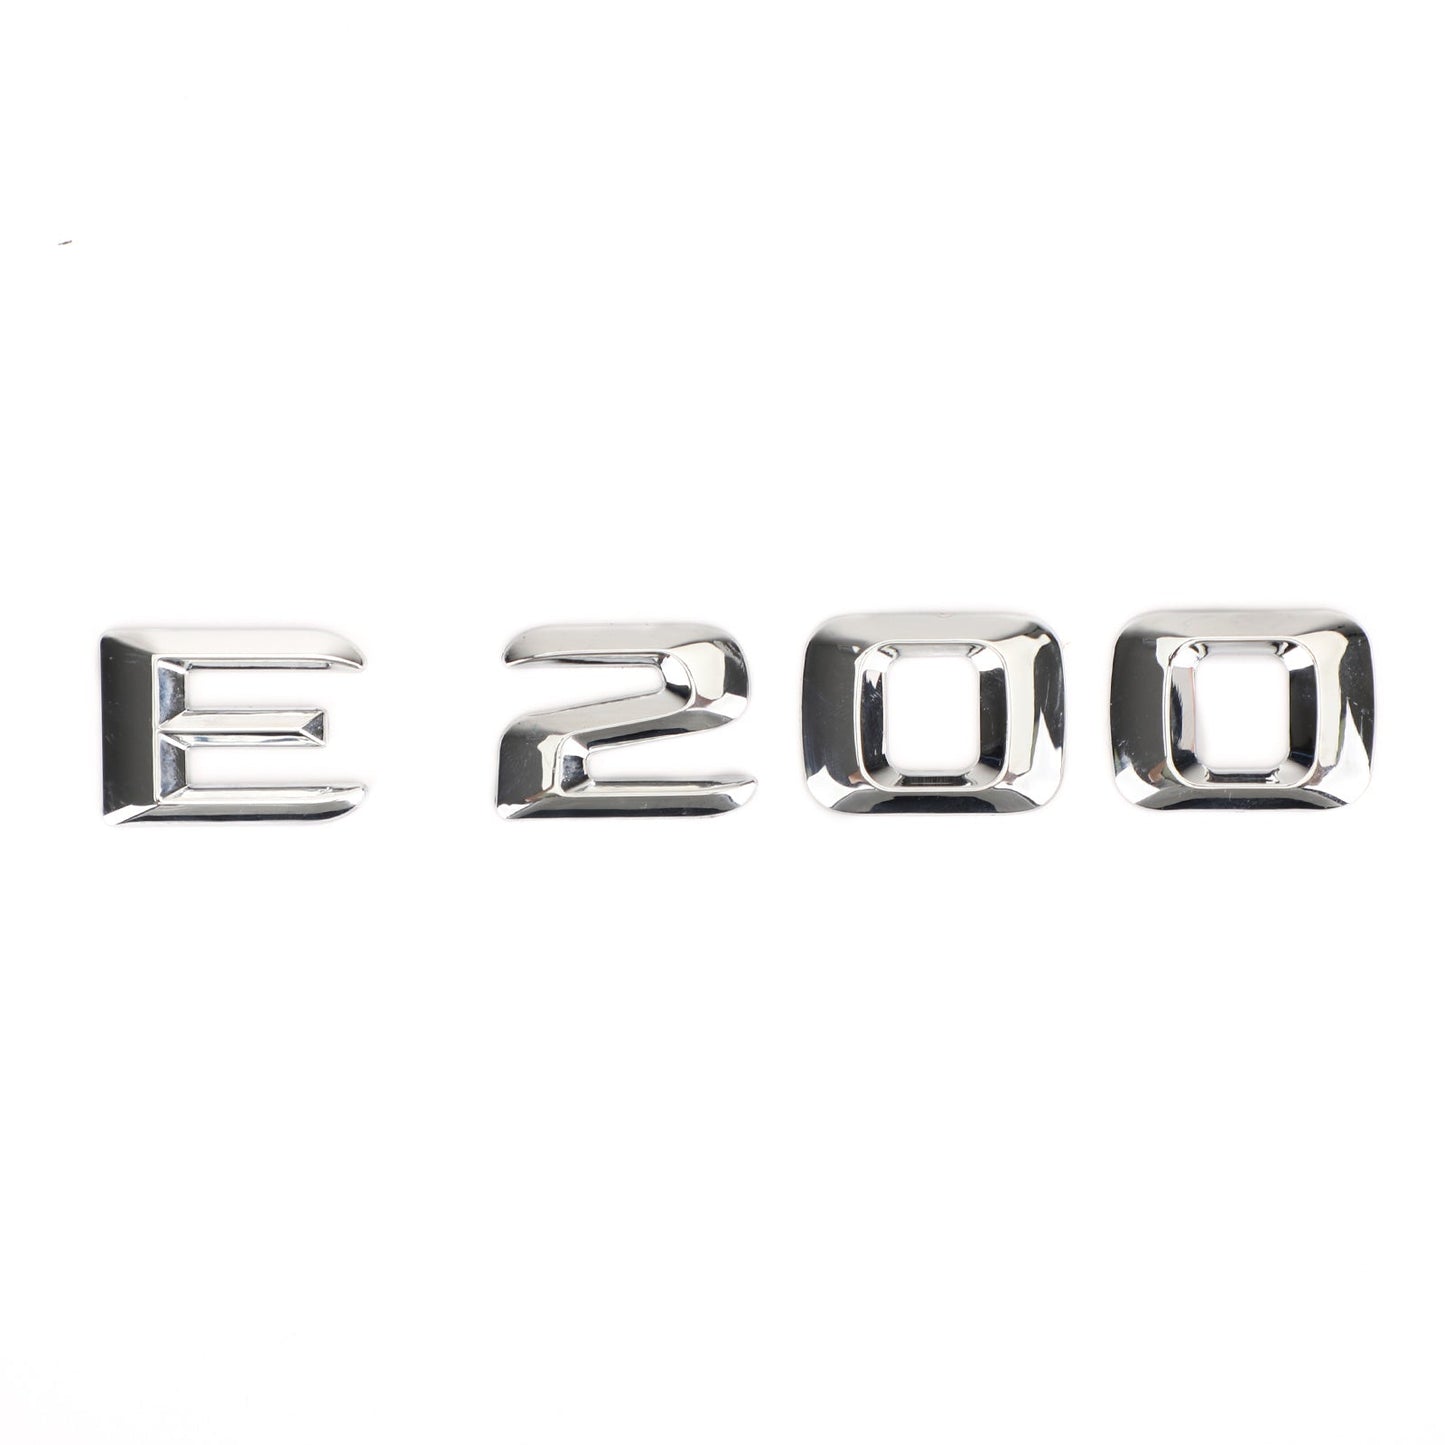 Rear Trunk Emblem Badge Nameplate Decal Letters Numbers Fit Mercedes E200 Chrome